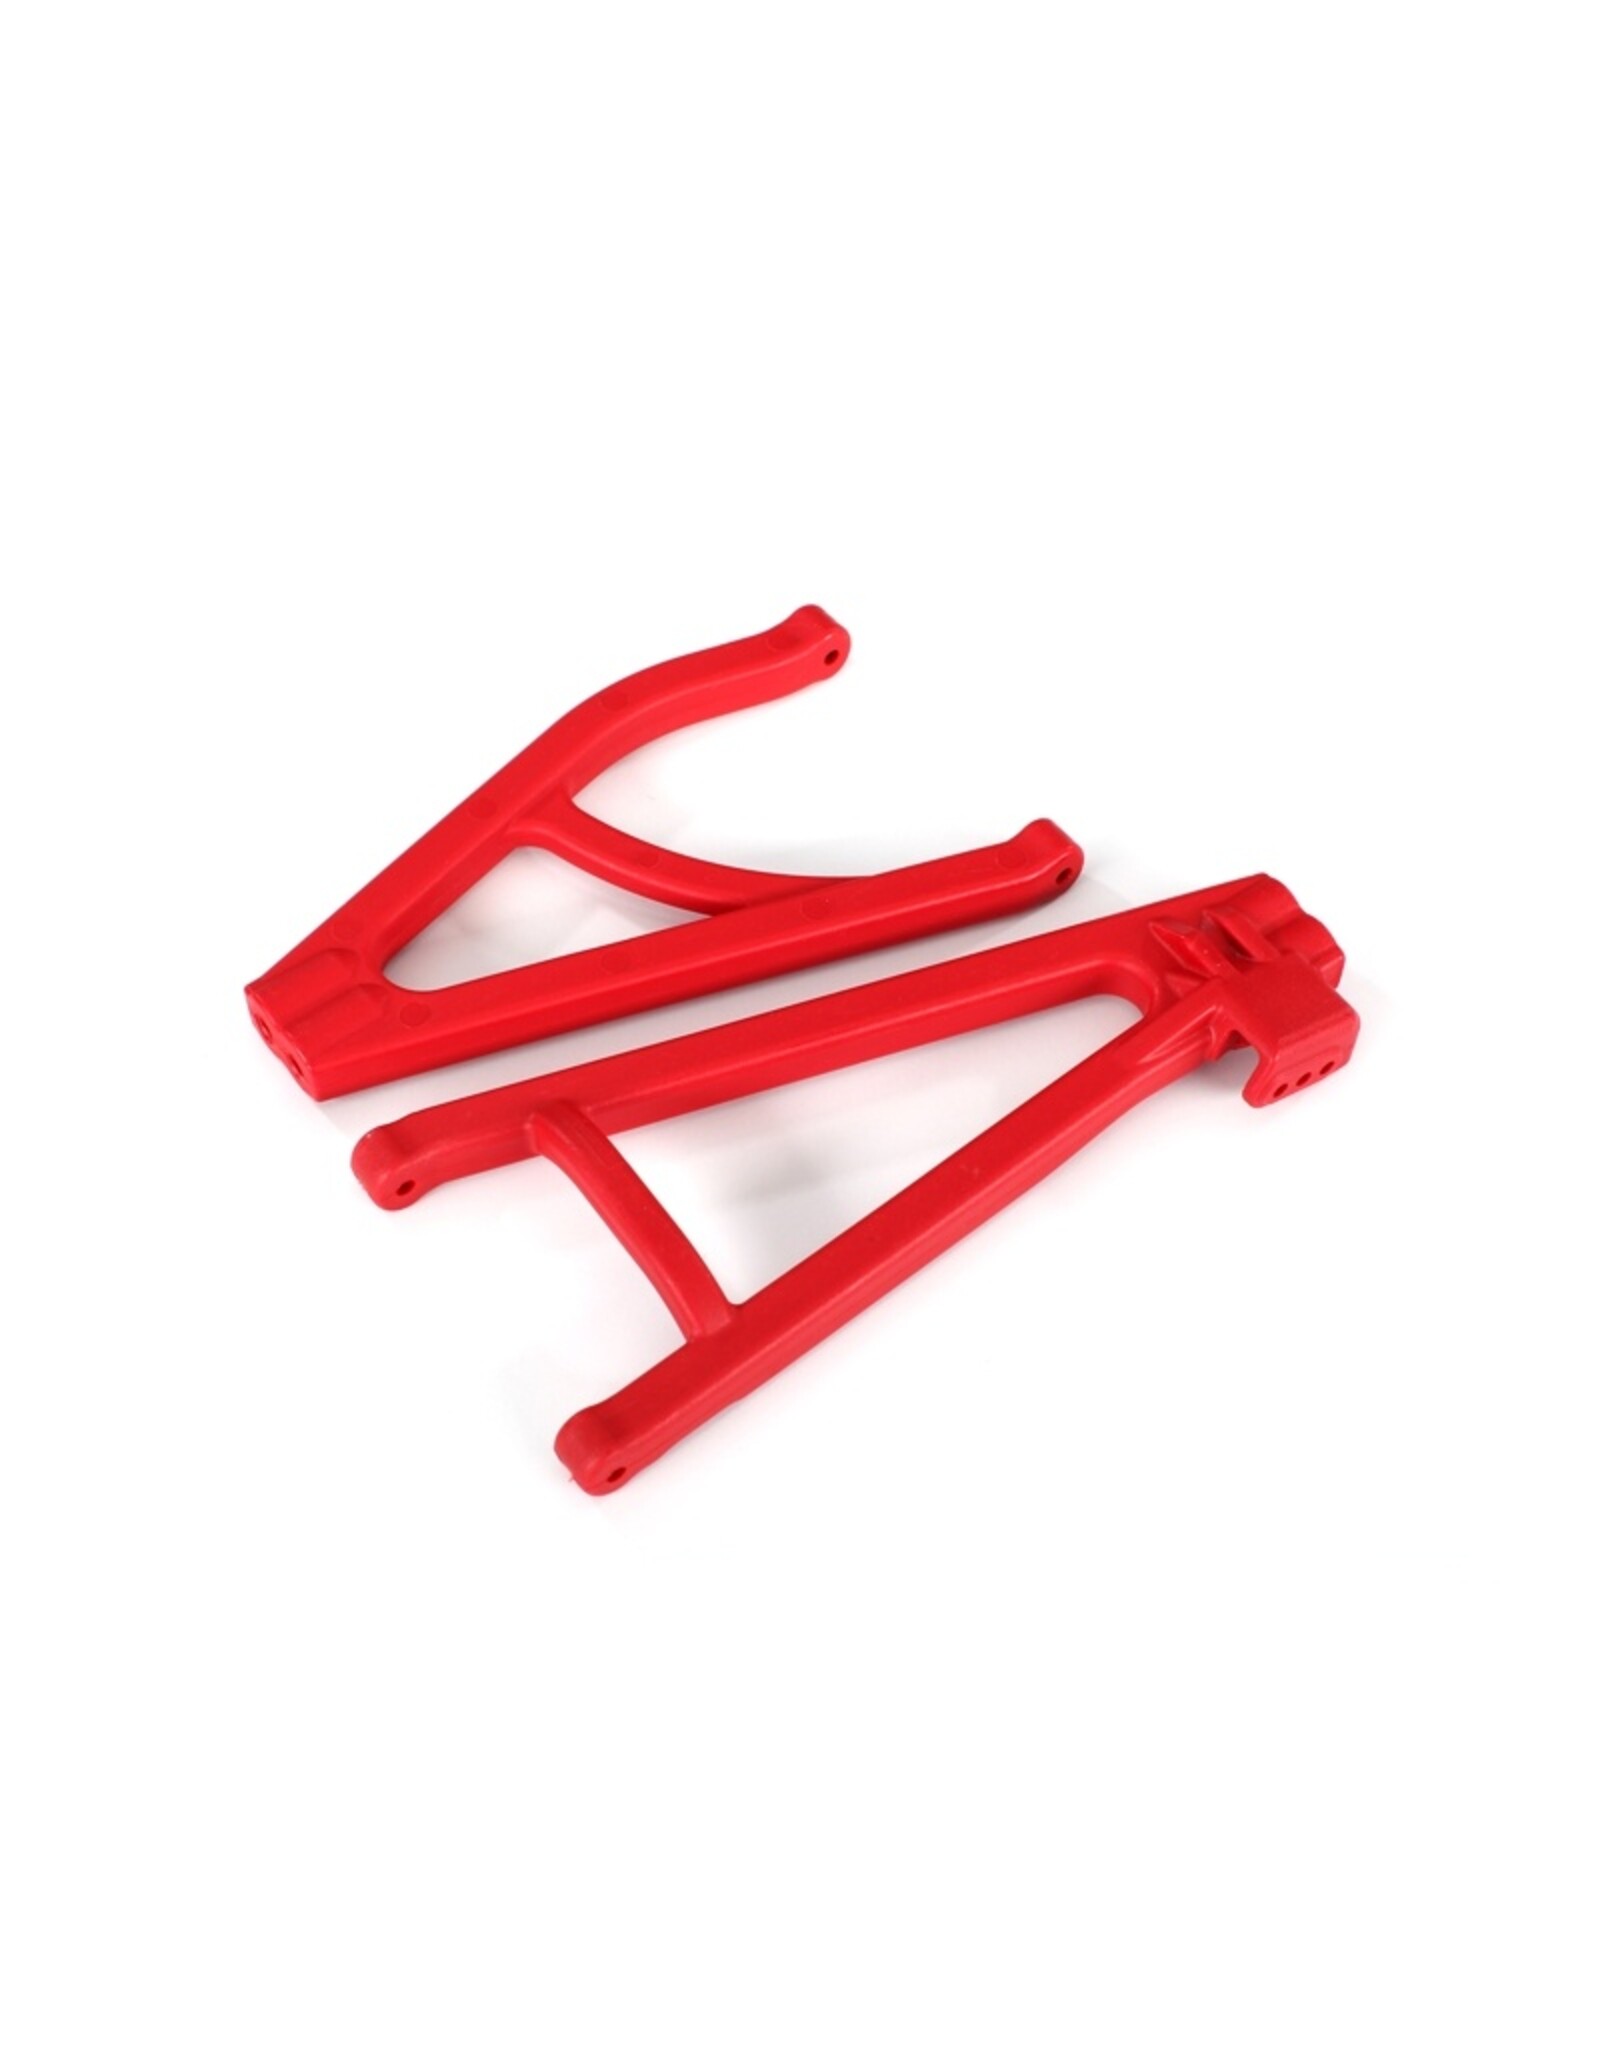 Traxxas TRA8634R Suspension arms, red, rear (left), heavy duty, adjustable wheelbase (upper (1)/ lower (1))